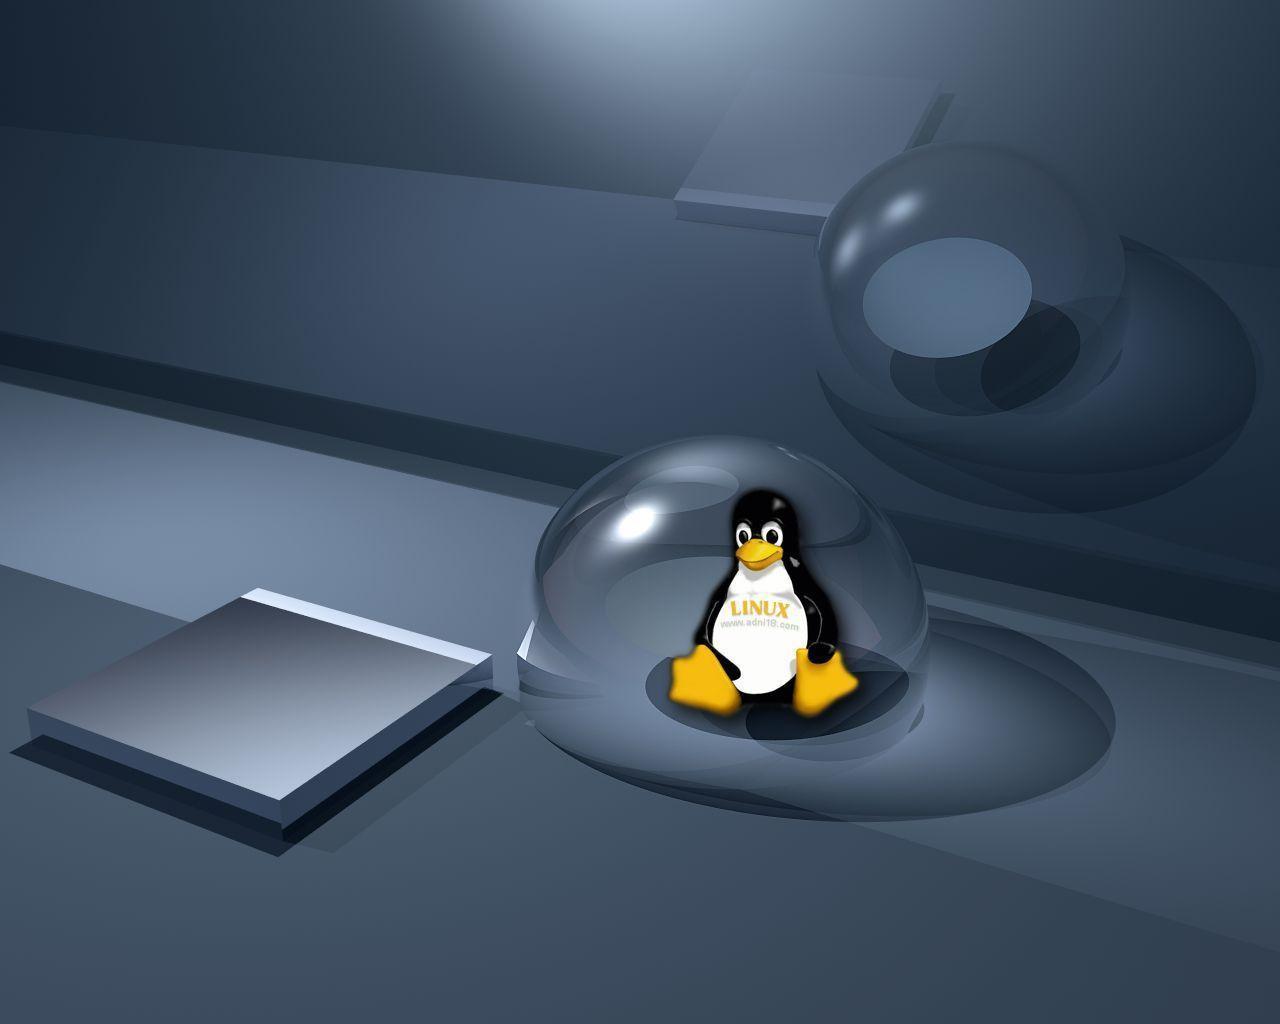 Free Linux Wallpaper Stickers and T